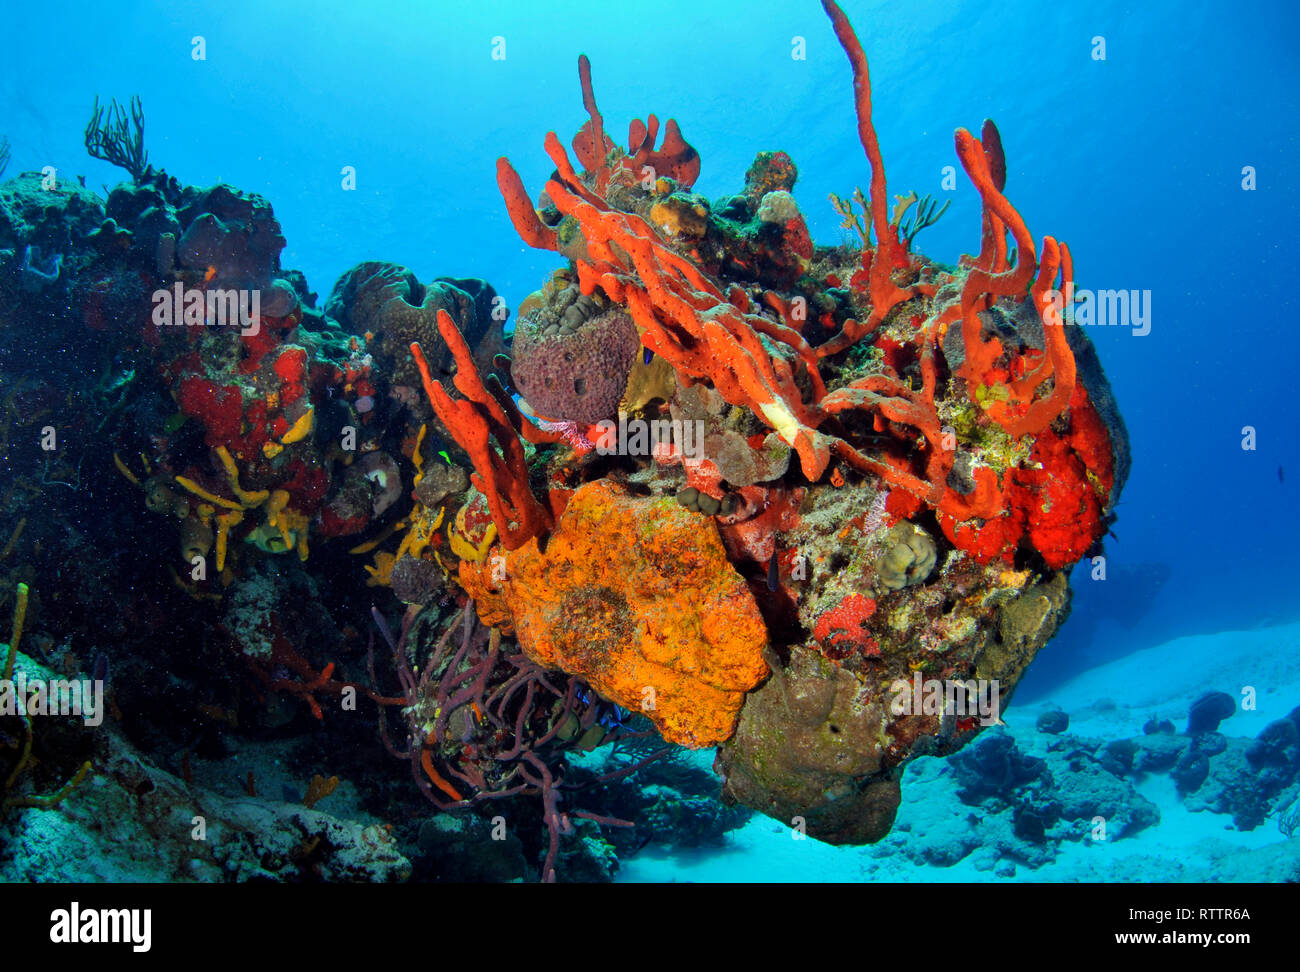 Colorful coral reefs and sponges, Cozumel,  Quintana-Roo, Mexico, Caribbean Sea Stock Photo